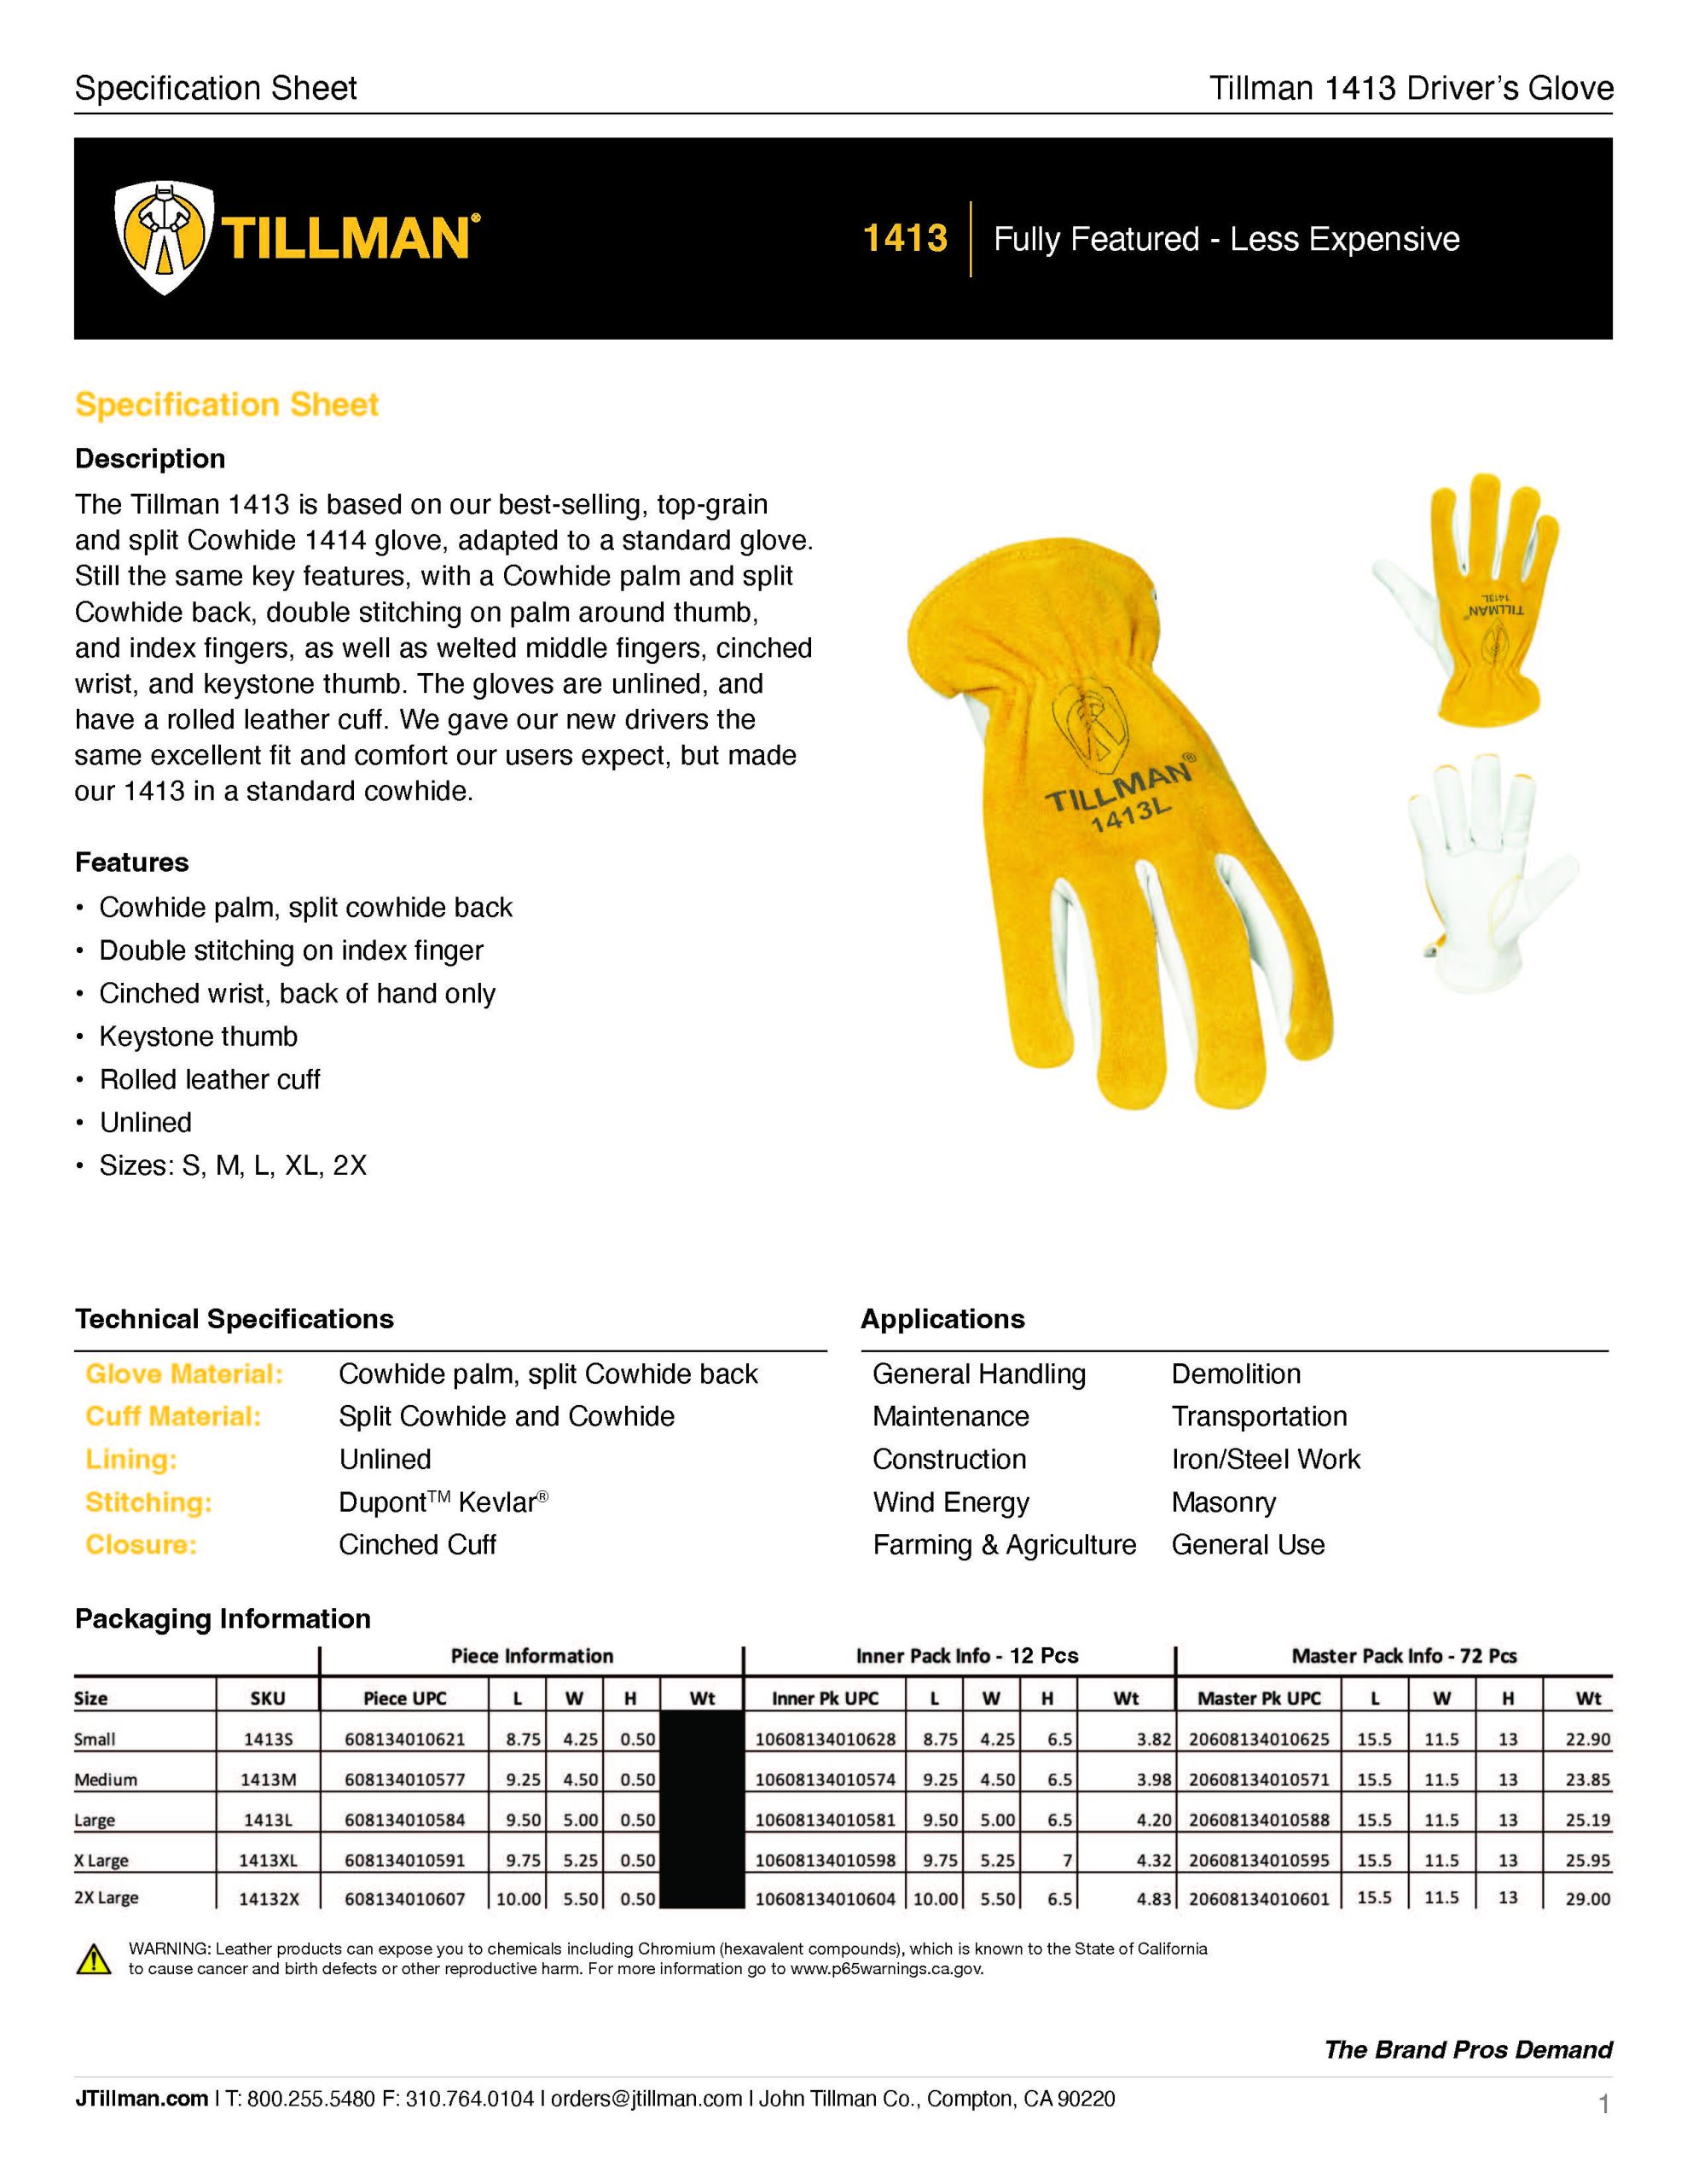 Thumbnail of 1413 Driver glove specification sheet